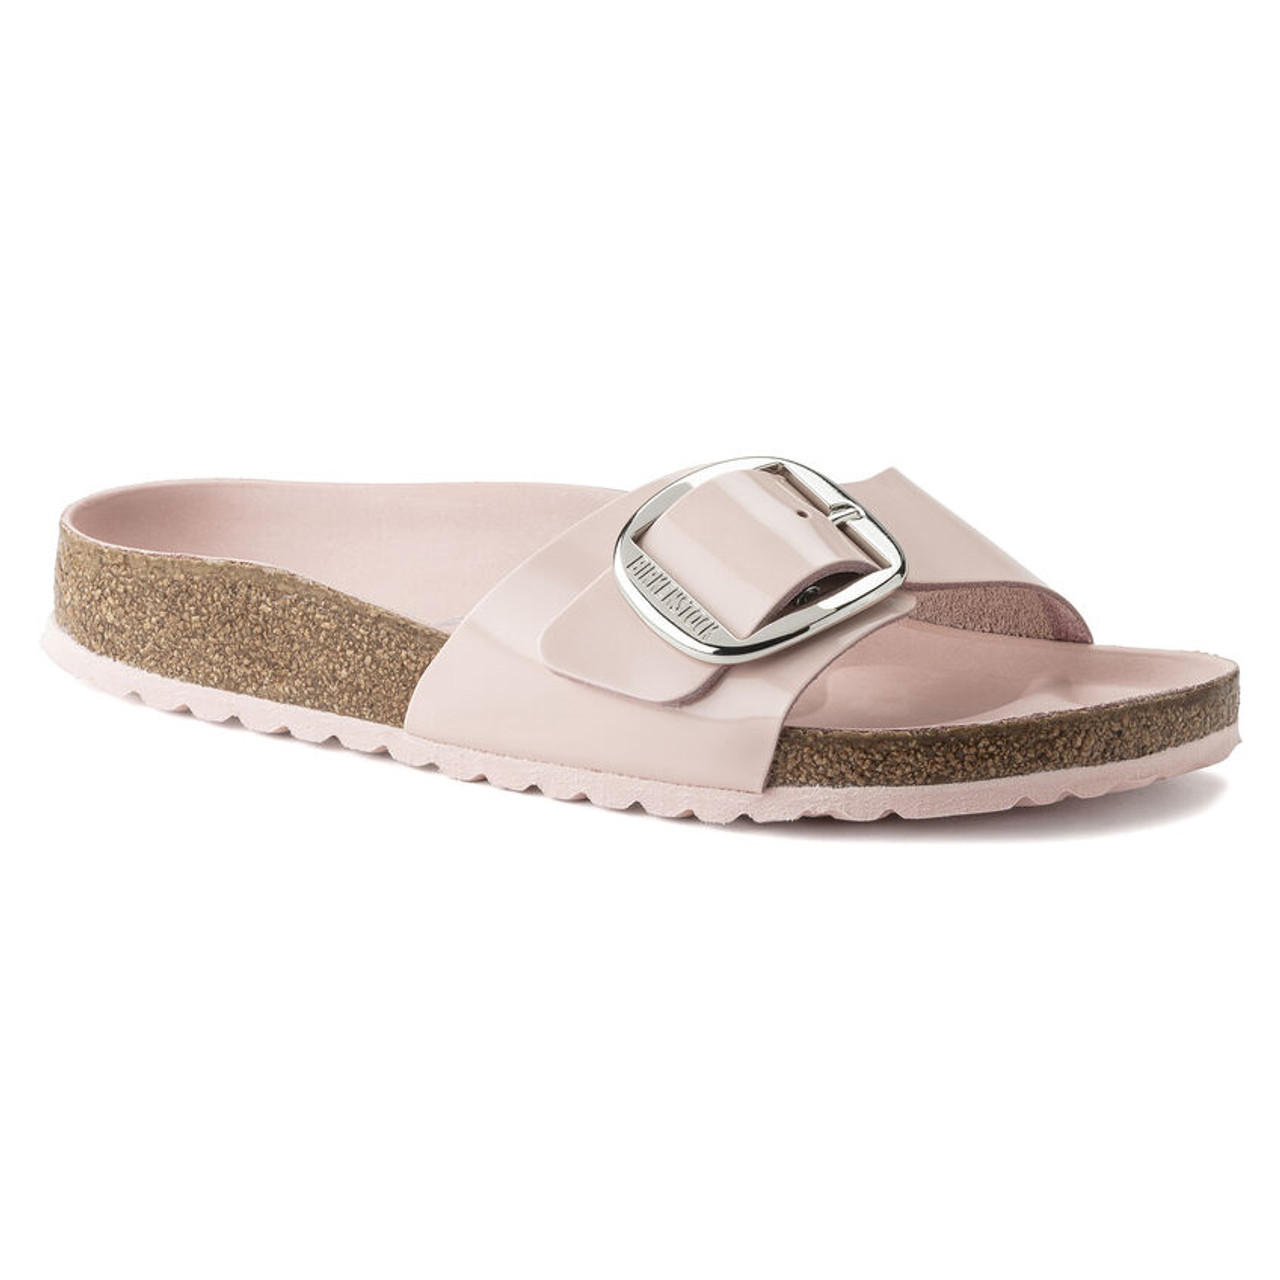 Birkenstock Women's Big Buckle Gizeh Natural Leather Patent in Black